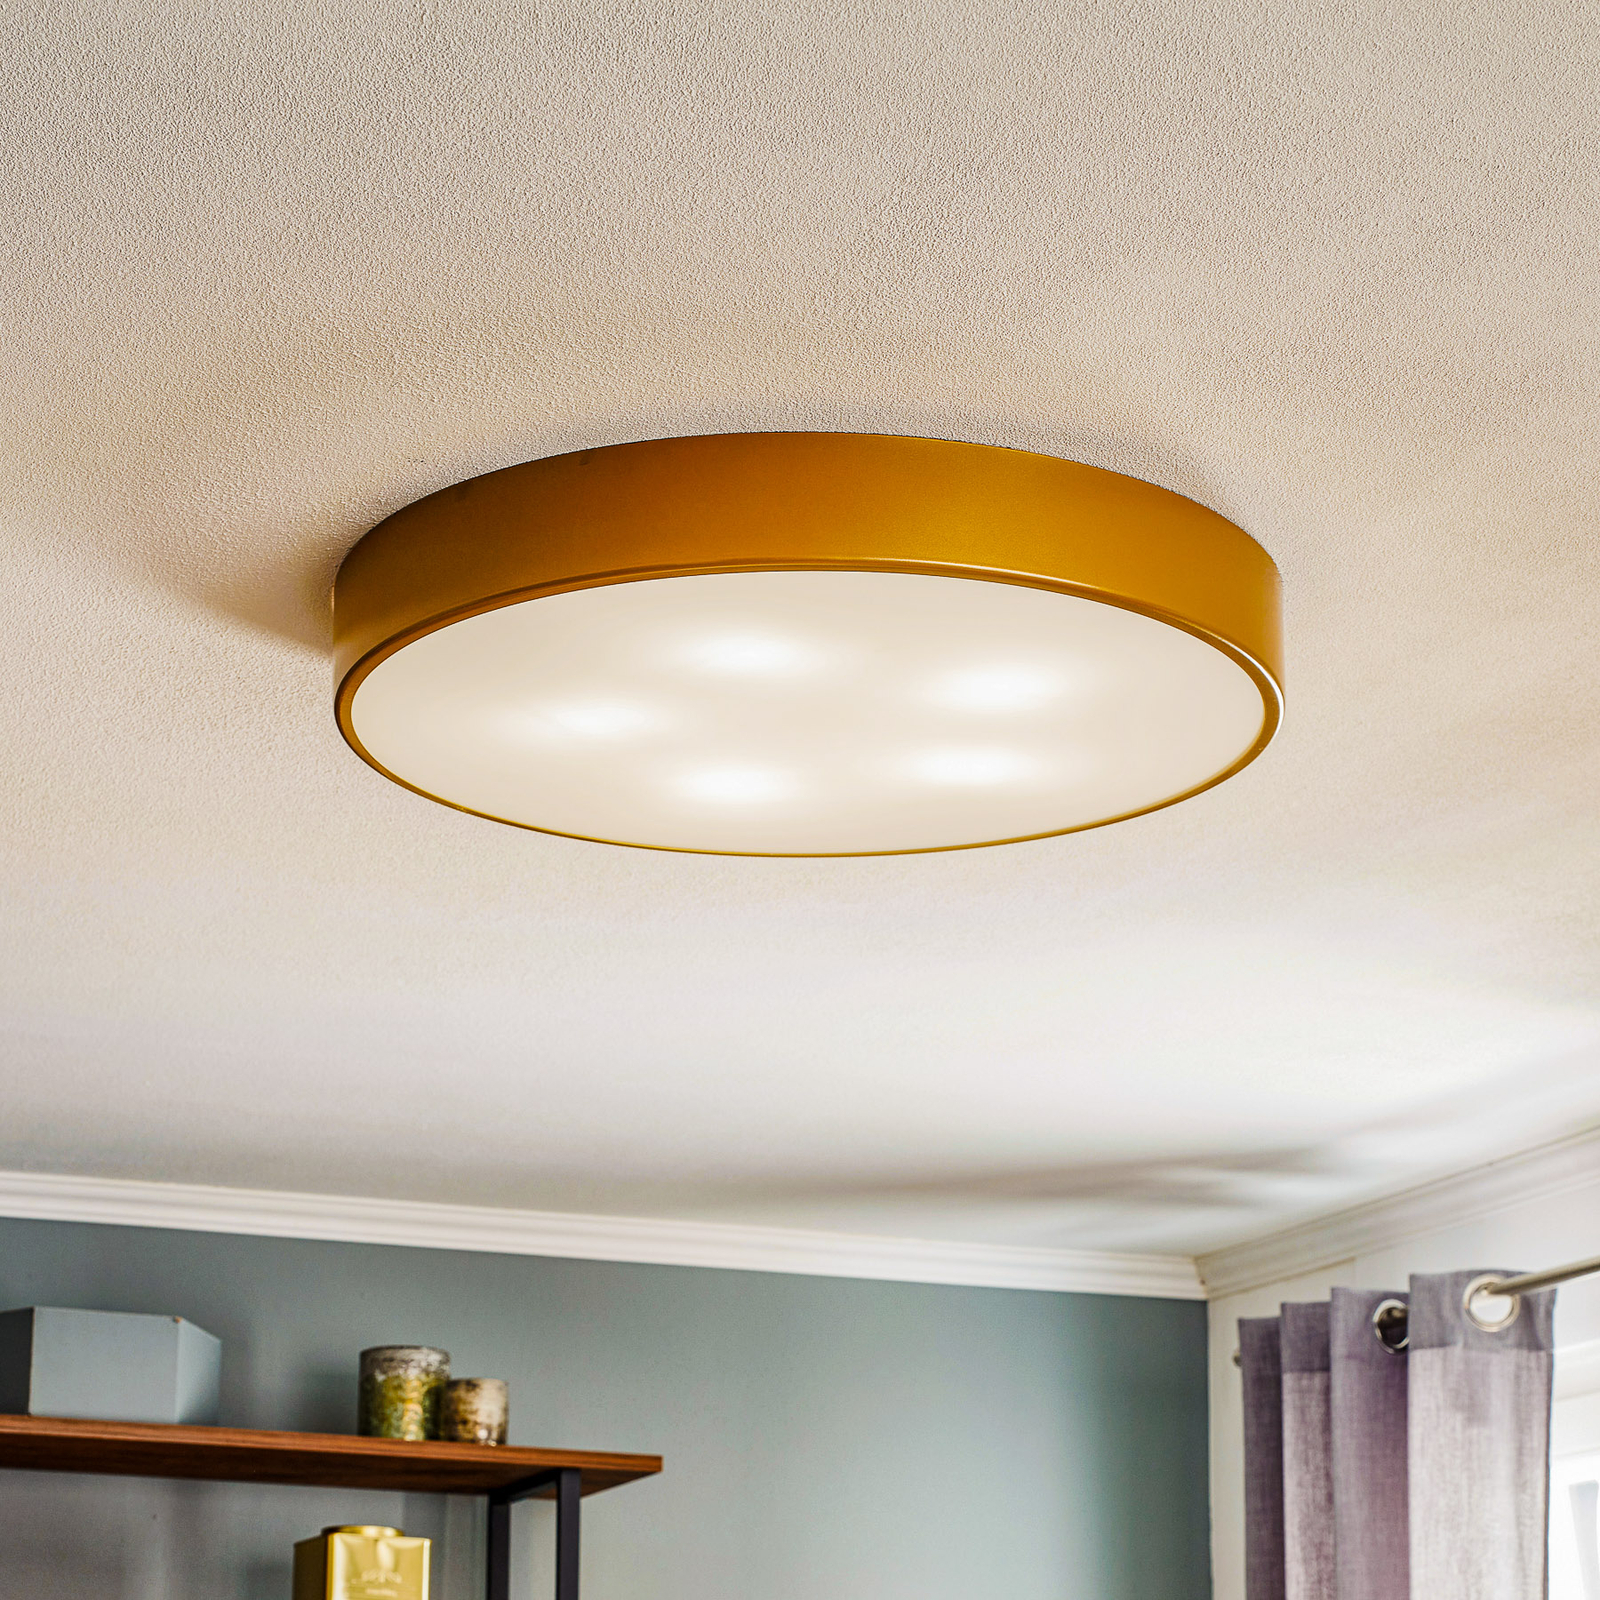 Cleo ceiling light in gold with diffuser, Ø 60 cm